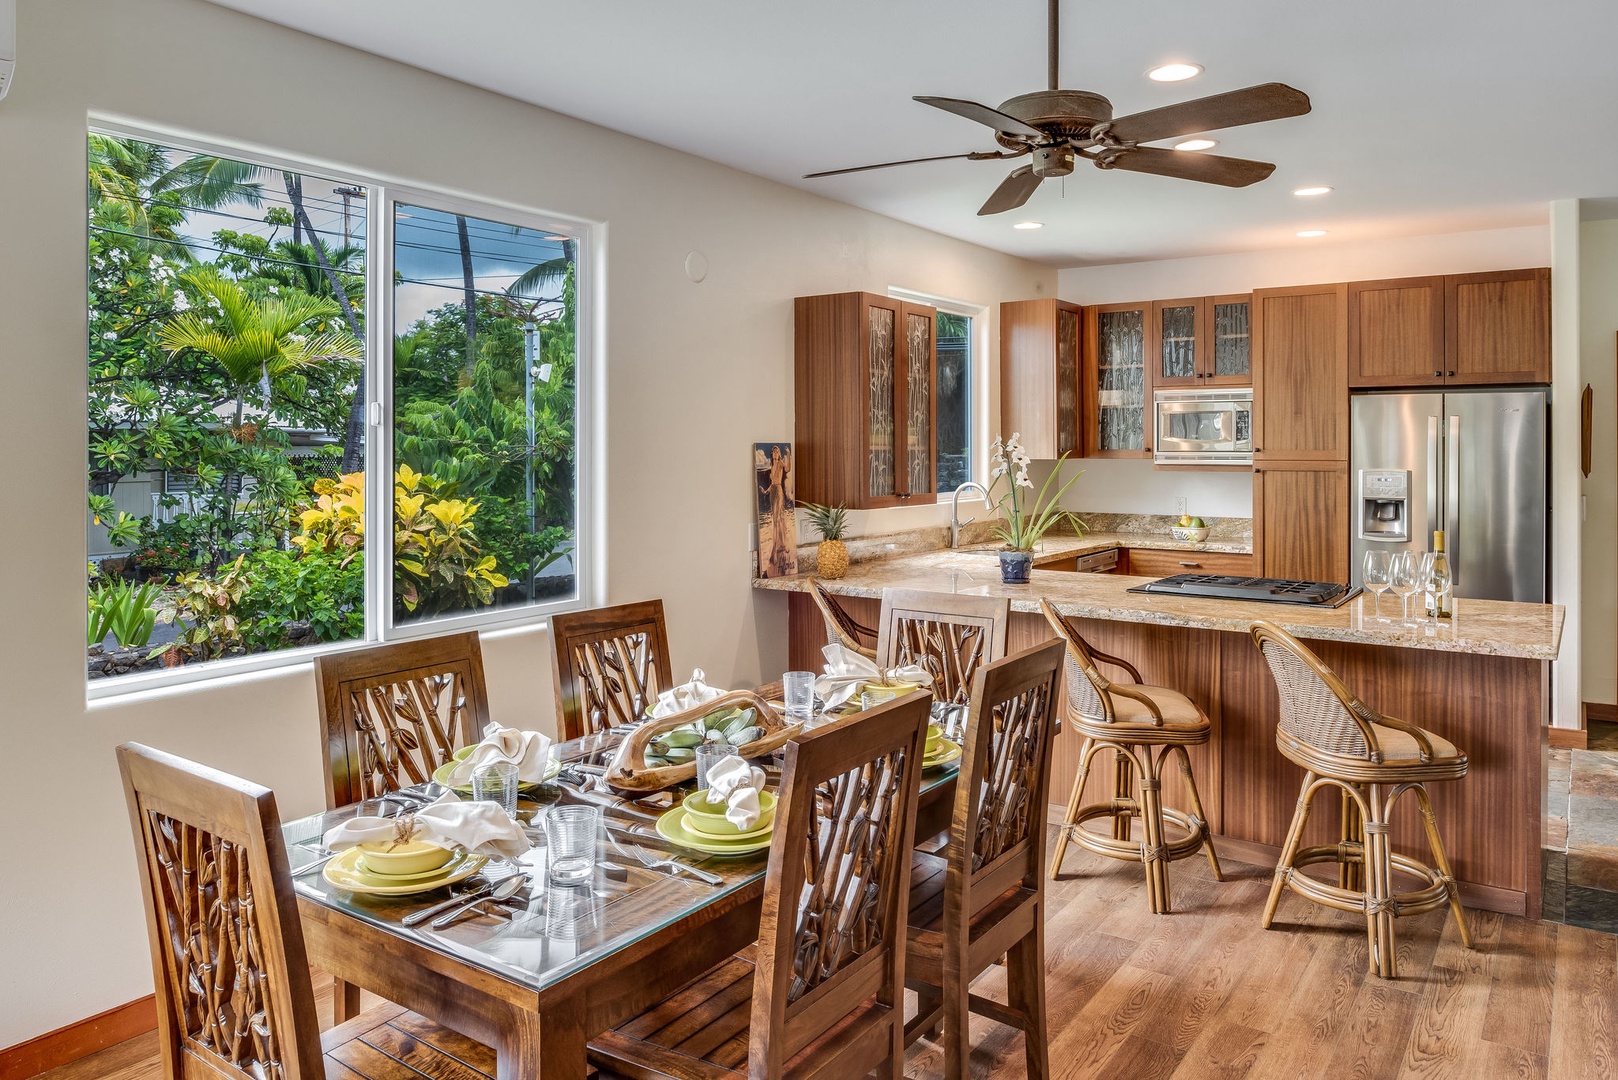 Kailua Kona Vacation Rentals, Kona Beach Bungalows** - Indulge in culinary delights at the Honu dining area, complemented by a chic kitchen bar.